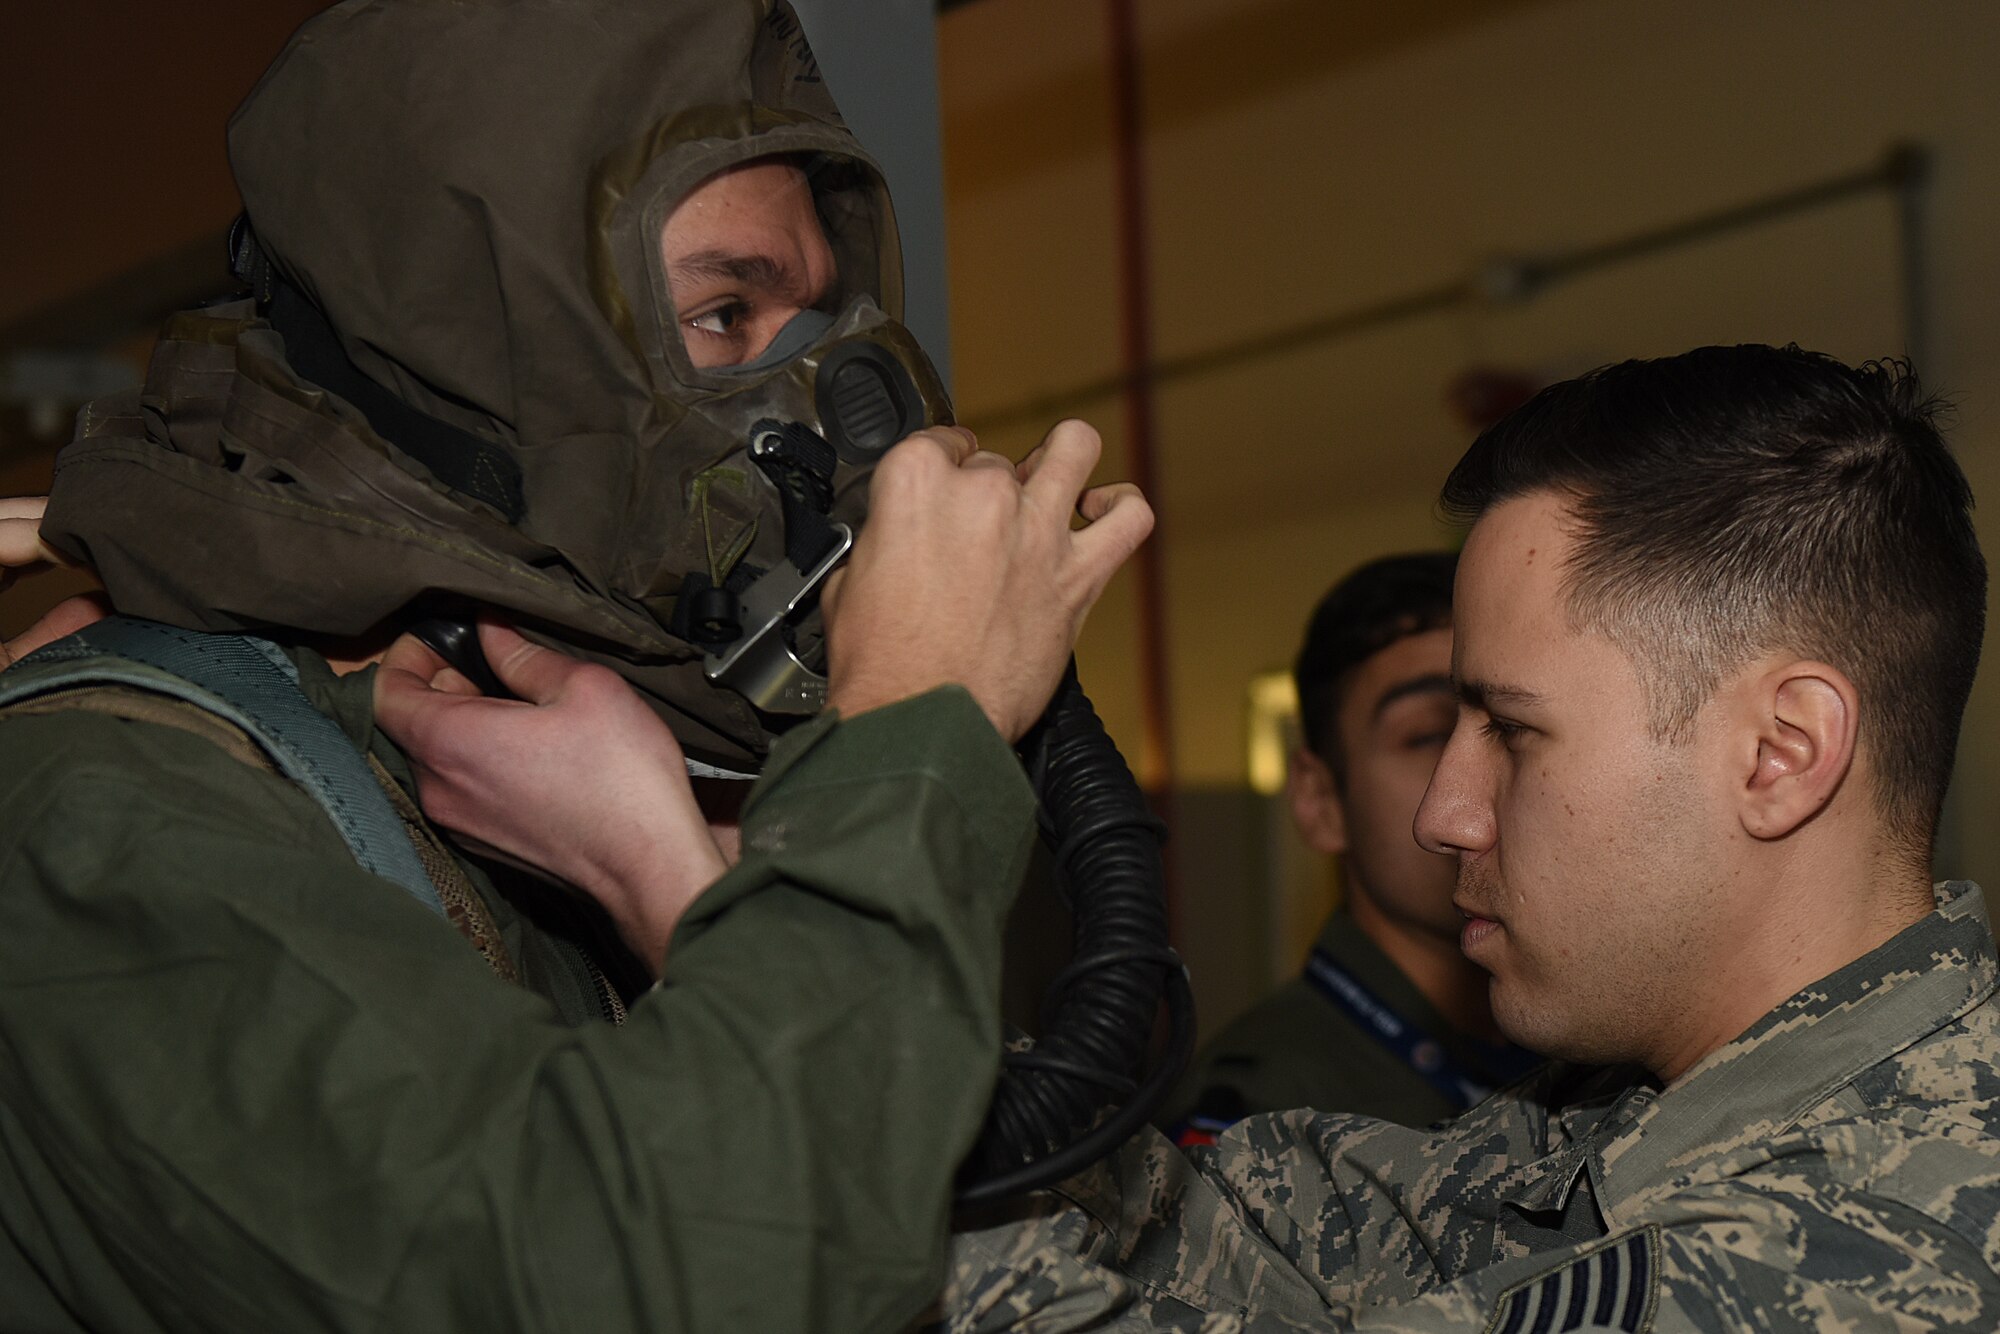 Tech. Sgt. David Vazquez Velez, 48th Fighter Wing Aircrew Flight Equipment, inspects mission-oriented protective posture gear during an Aircrew Contamination Control Area training exercise at Royal Air Force Lakenheath, England, Feb. 21, 2020. The training is conducted to ensure pilots and weapons systems officers can maintain mission readiness under any adverse conditions. (U.S. Air Force photo by Airman 1st Class Jessi Monte)